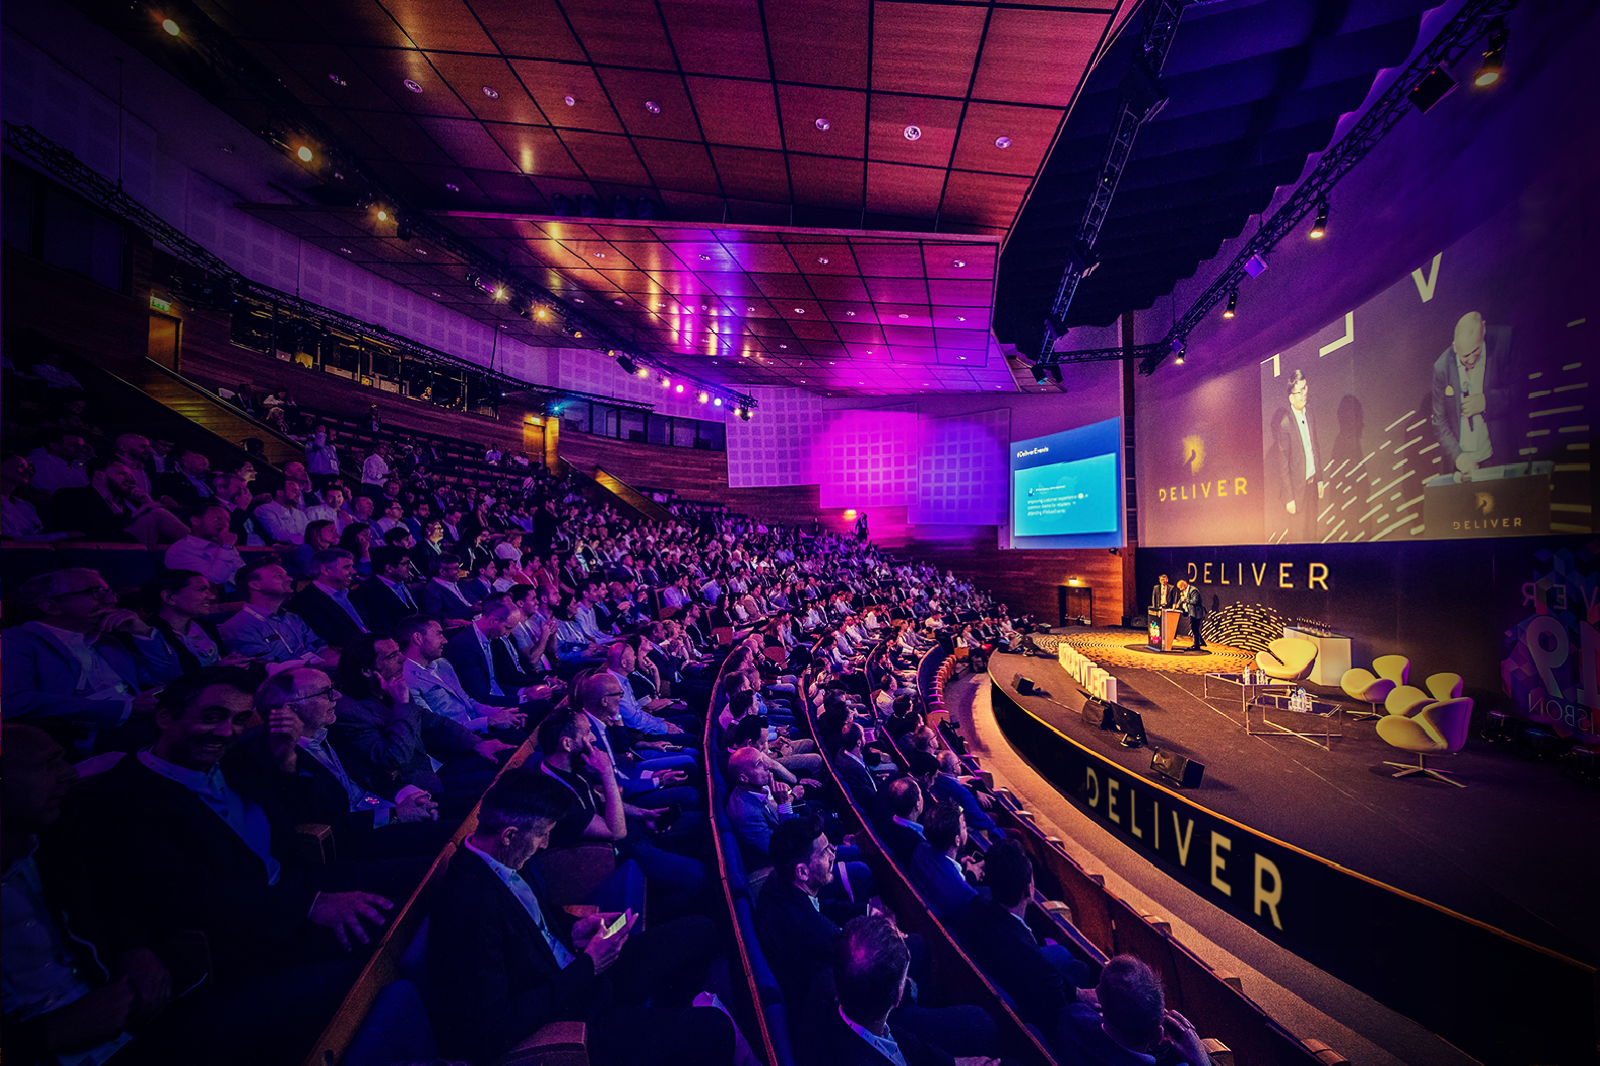 JOIN 1,700 EUROPEAN E-COMMERCE & LOGISTICS LEADERS UNDER ONE ROOF